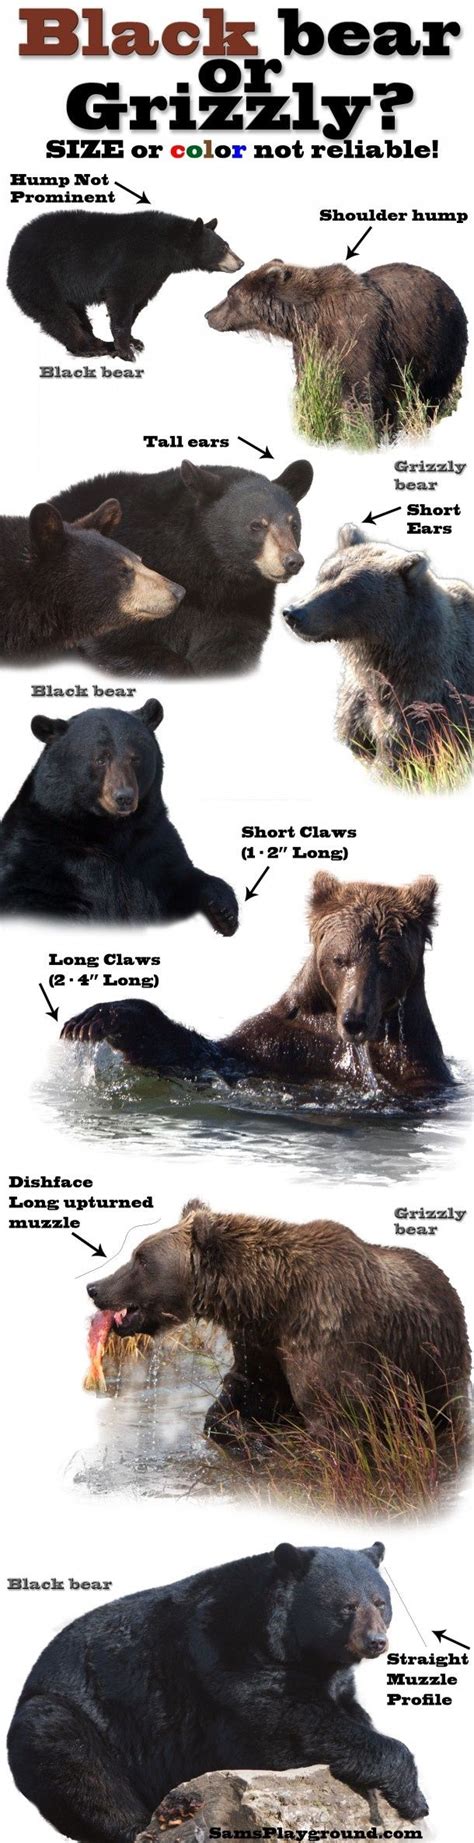 Black Or Grizzly Bear Comparison Info Graphic Its Good To Know The